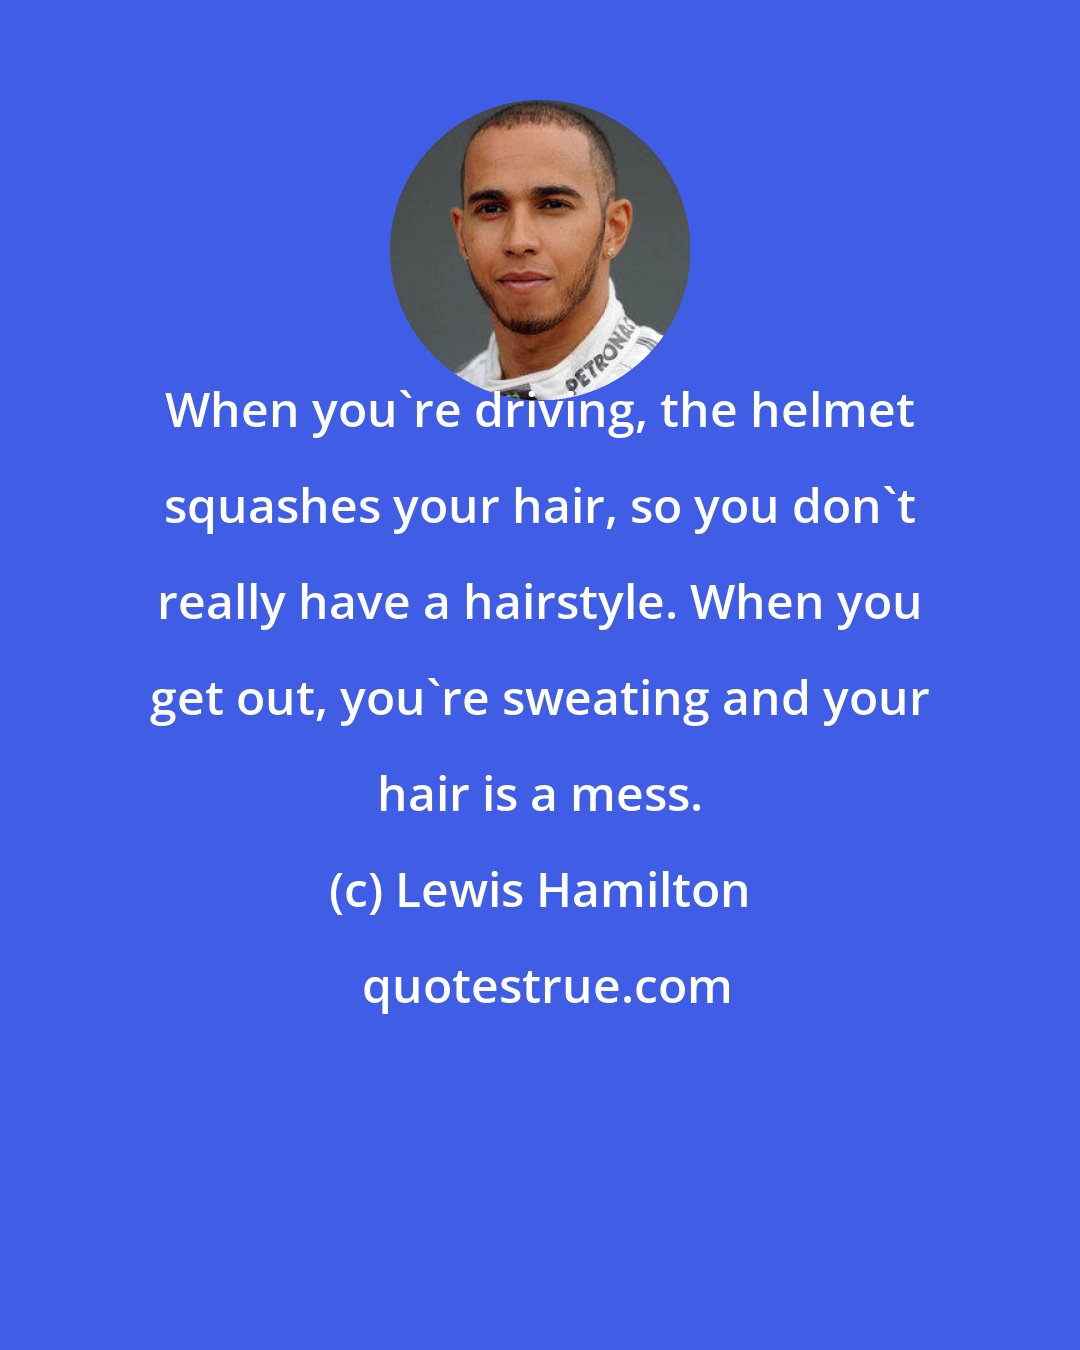 Lewis Hamilton: When you're driving, the helmet squashes your hair, so you don't really have a hairstyle. When you get out, you're sweating and your hair is a mess.